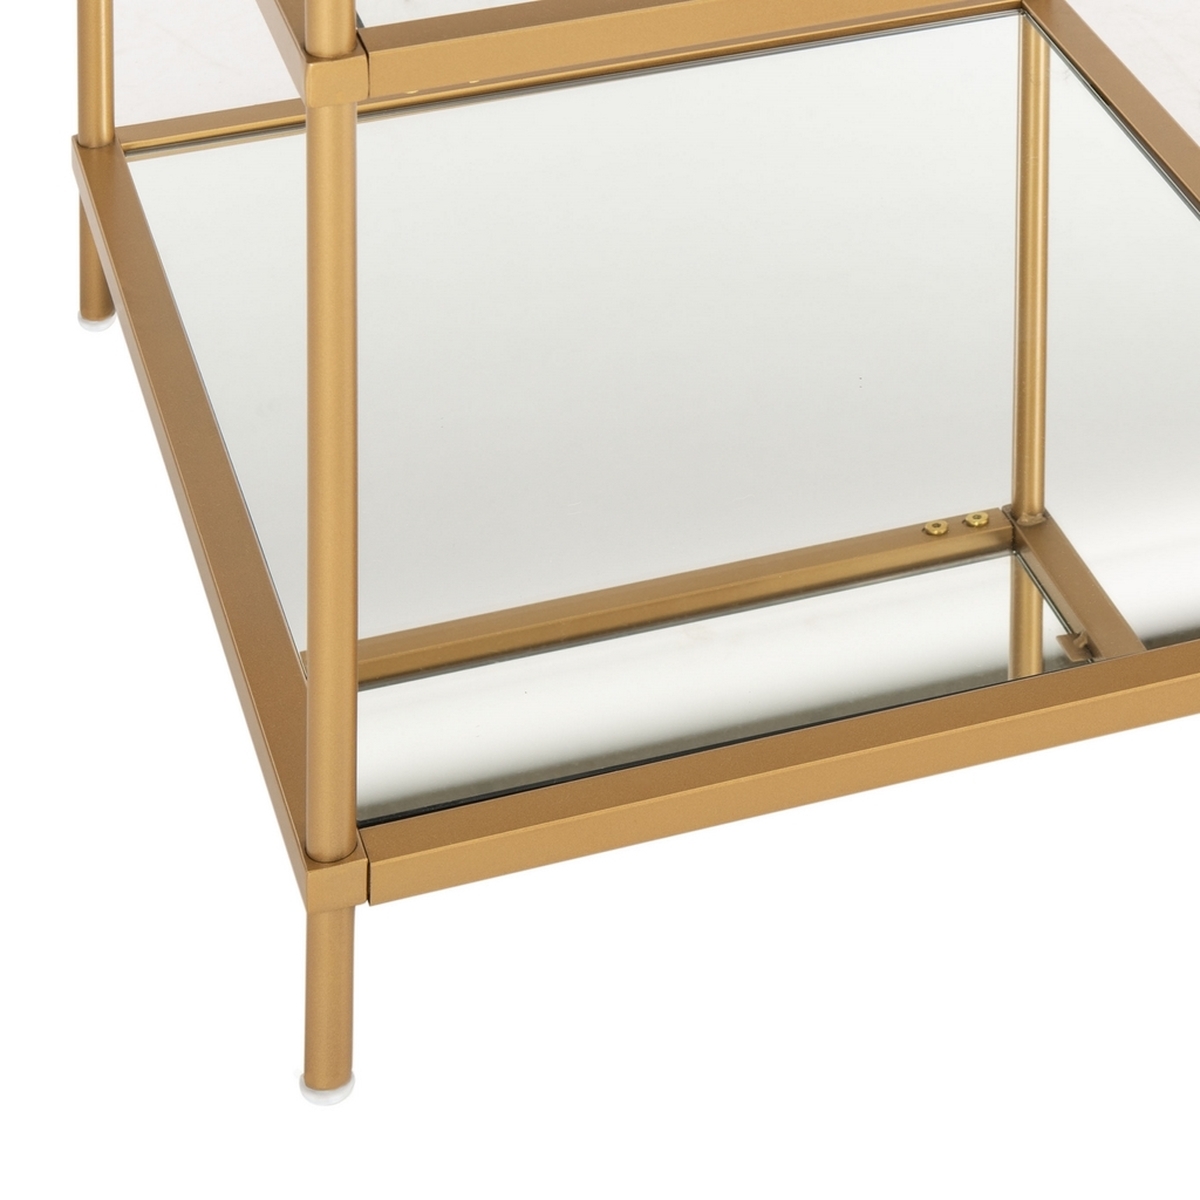 Noelia 3 Tier Accent Table - Gold - Arlo Home - Image 5